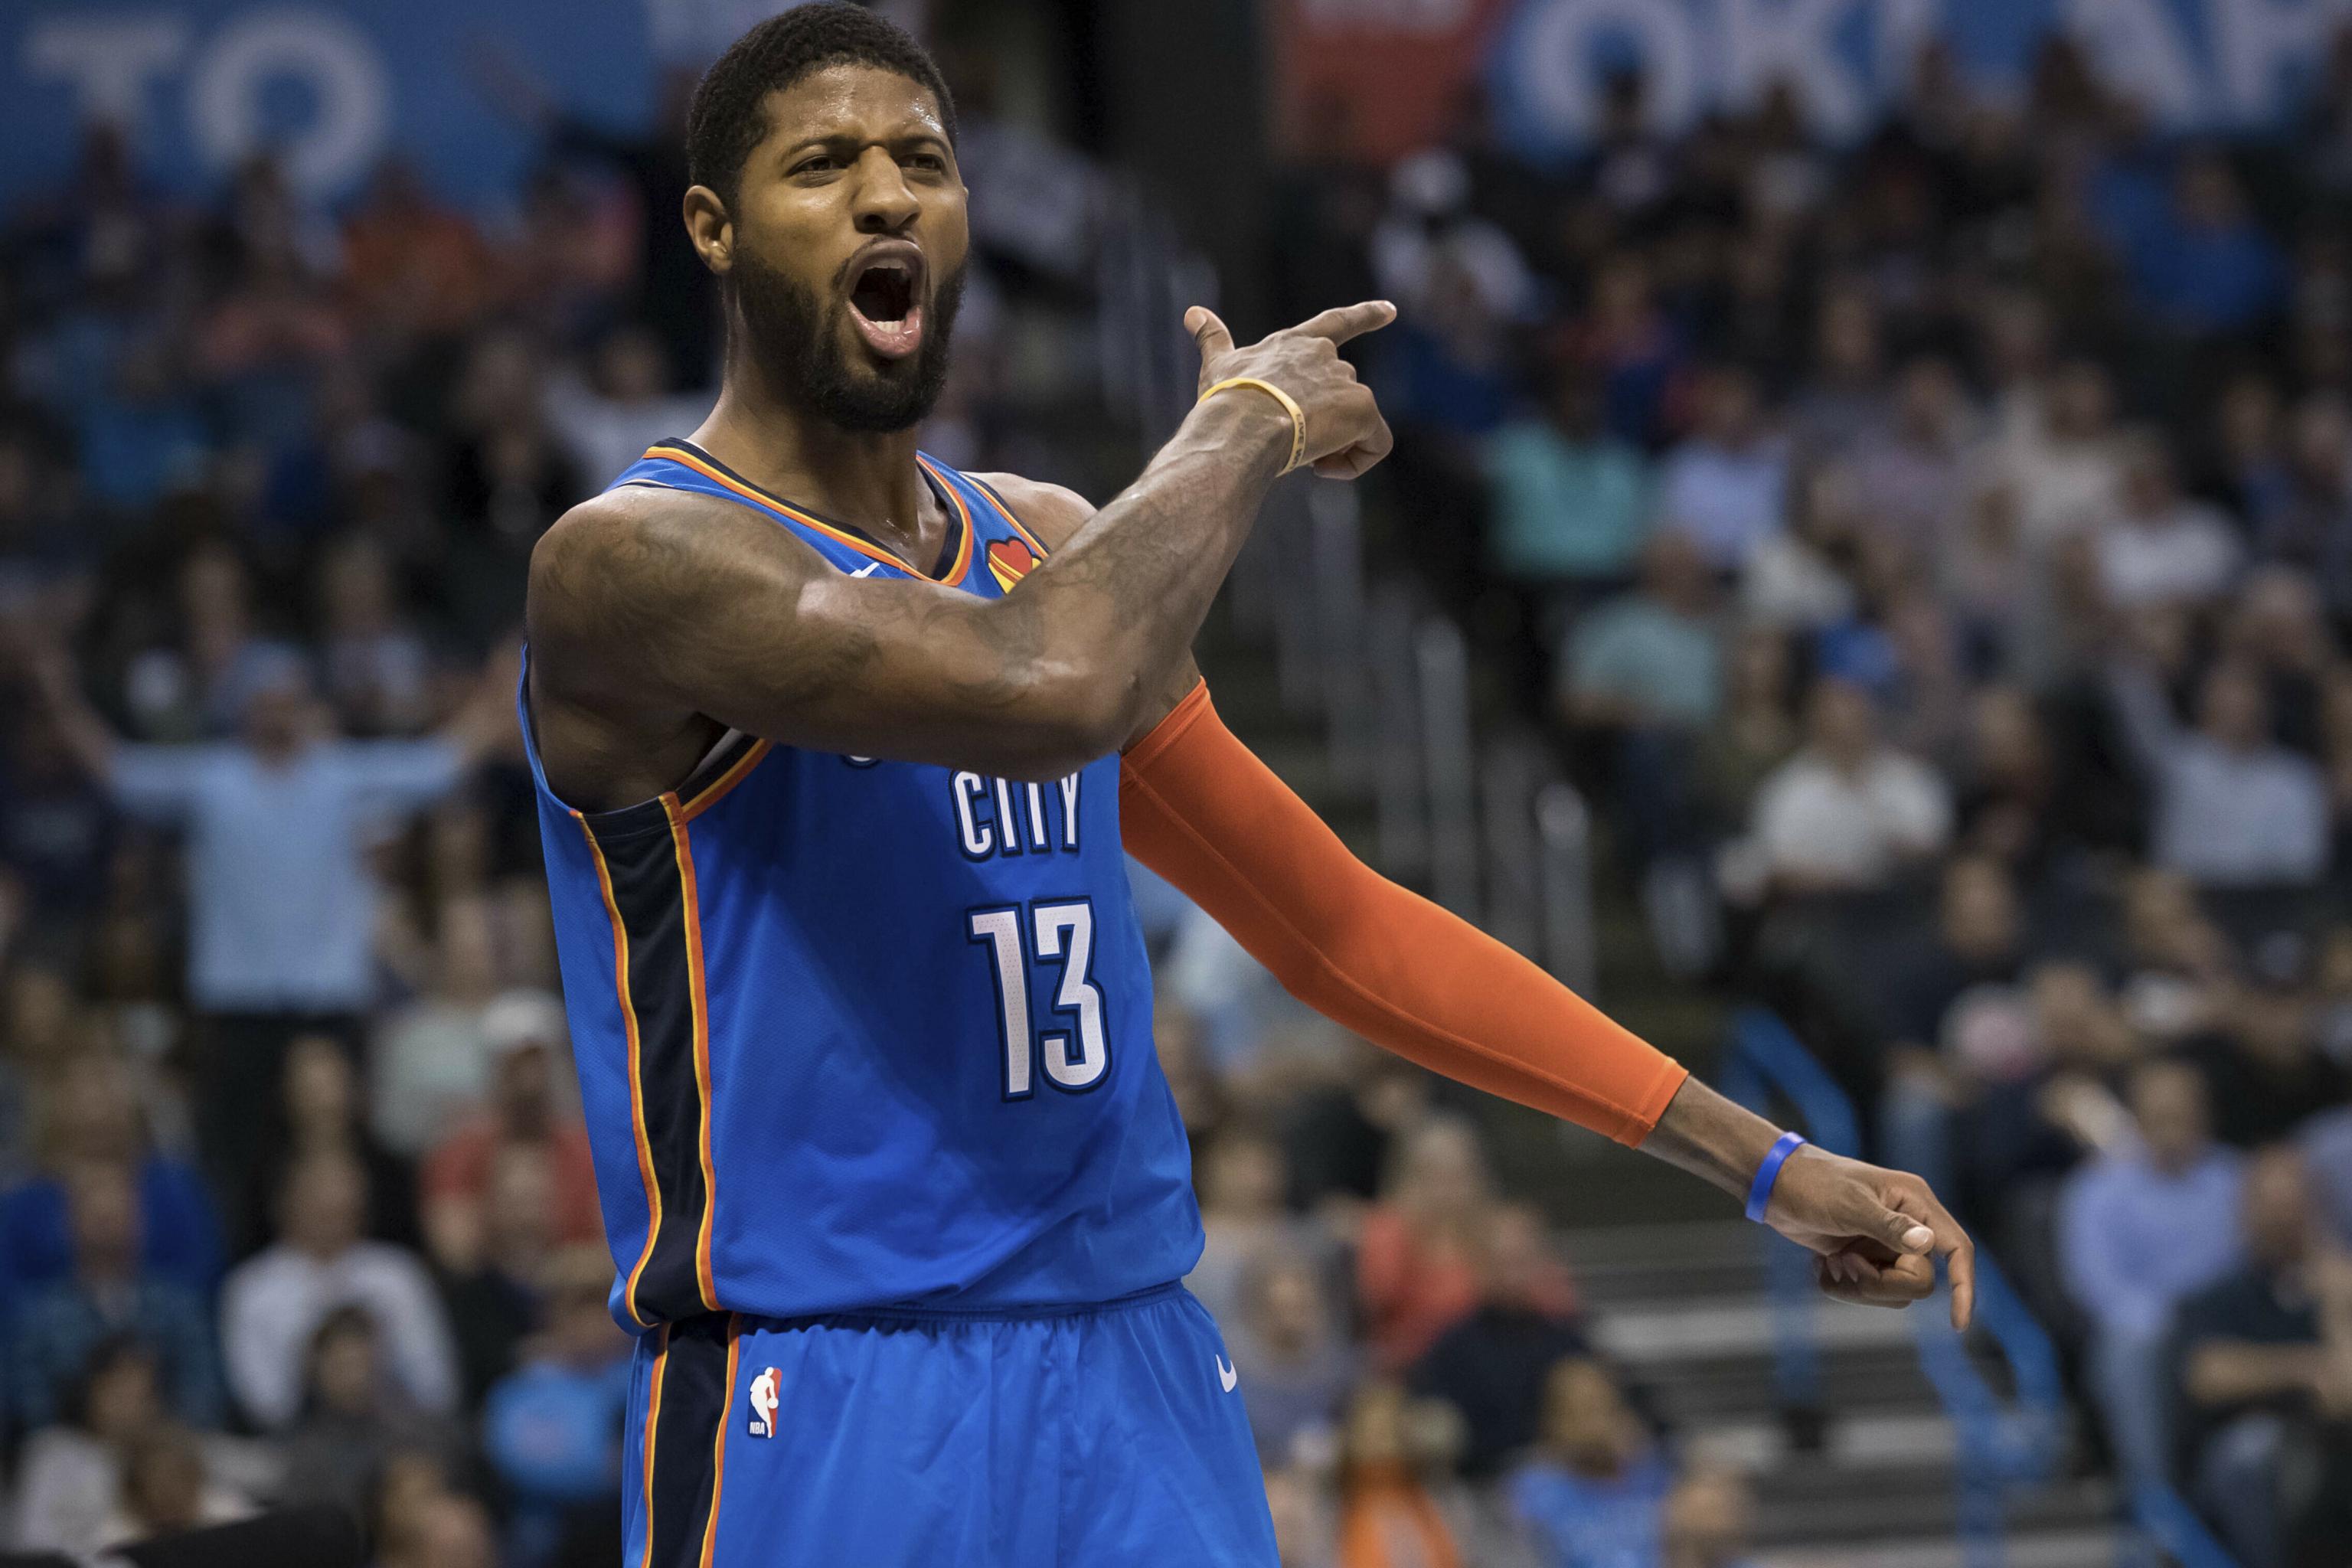 Paul George was well-received in OKC, but nothing like he's about